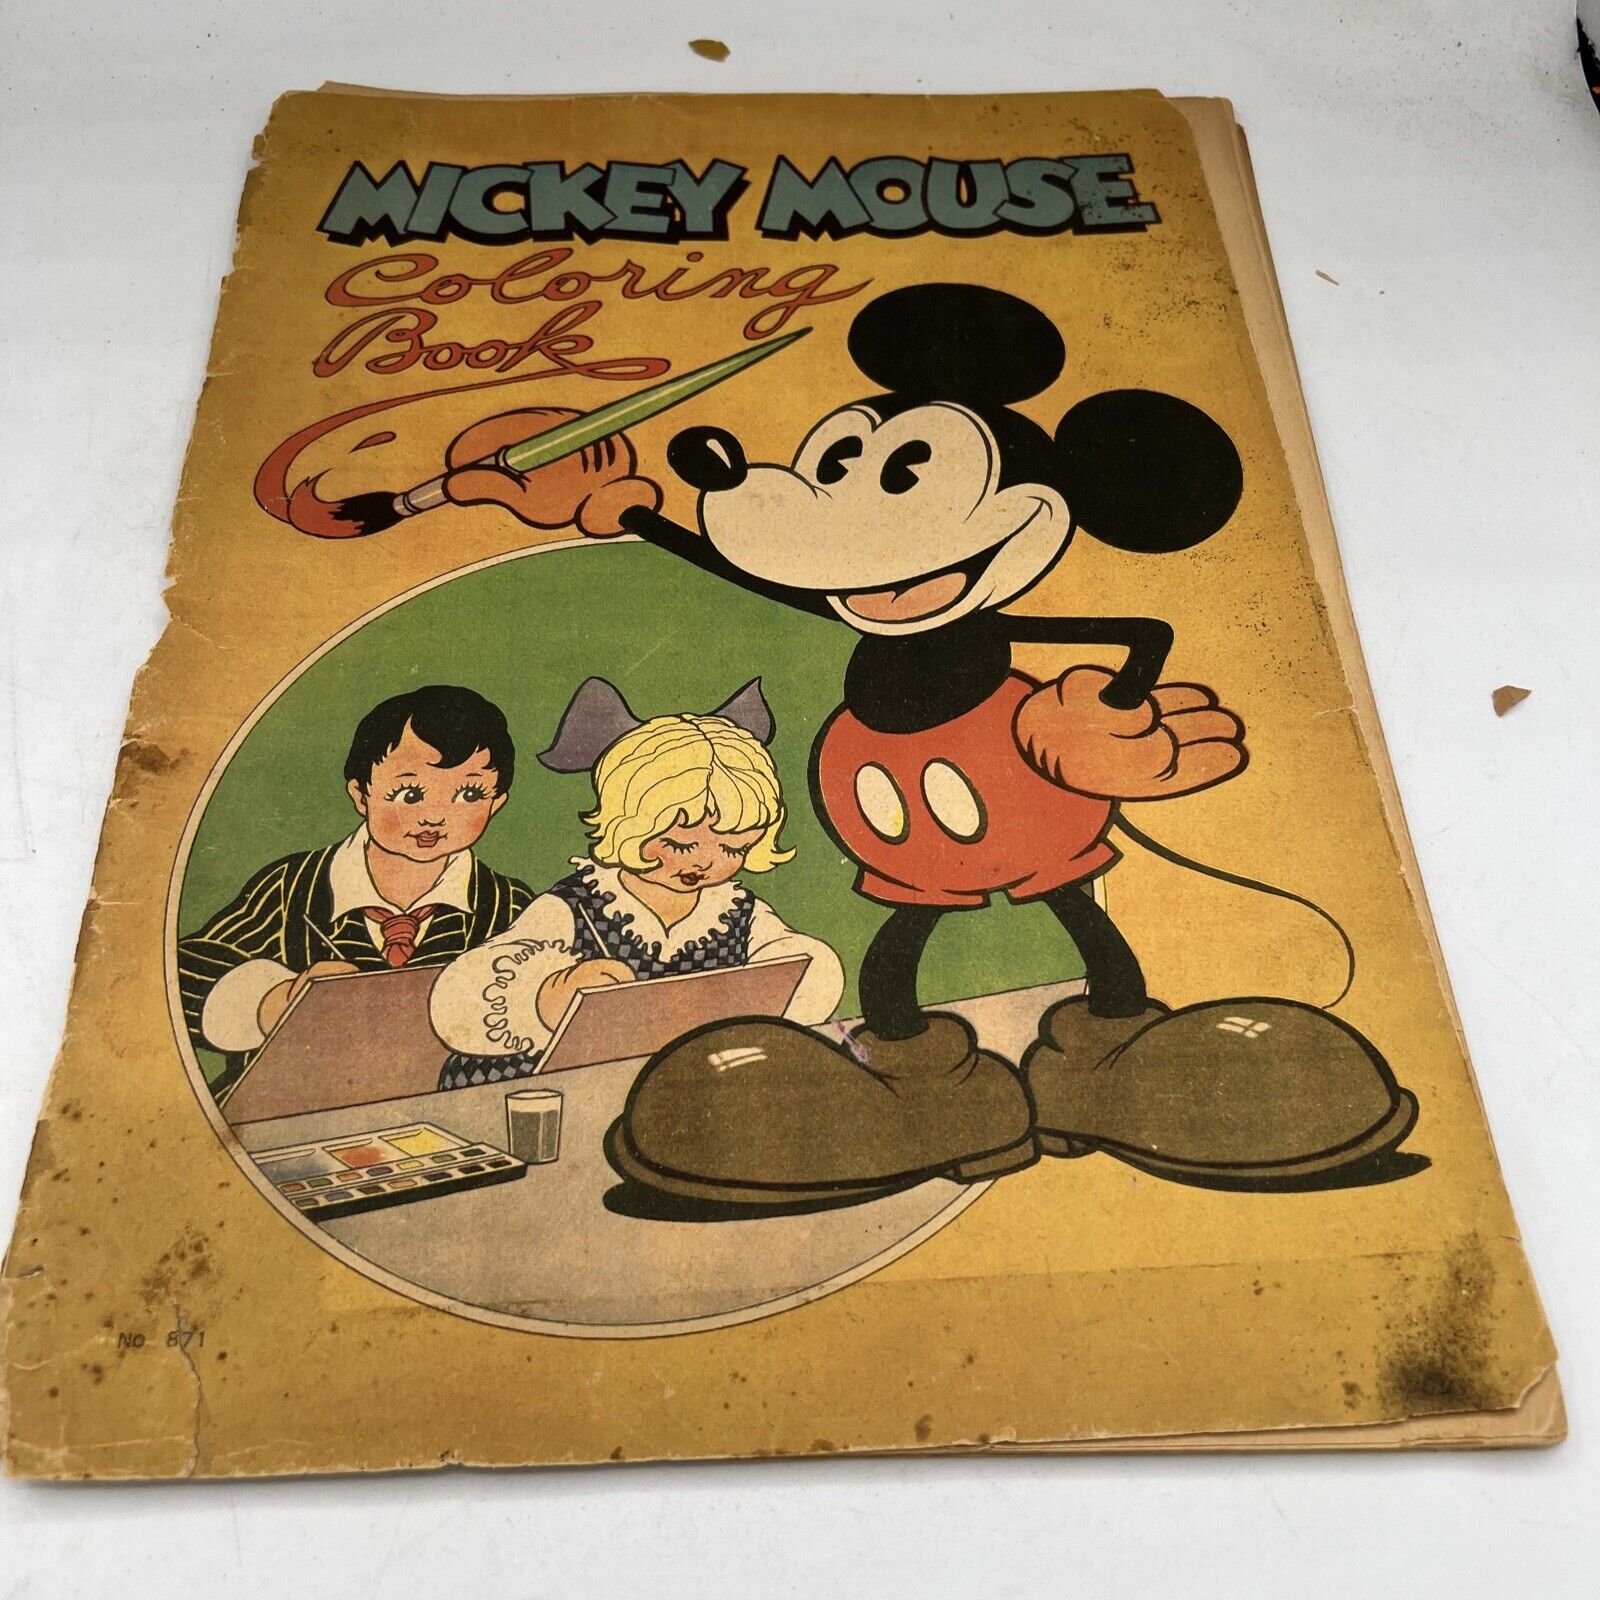 ANTIQUE VINTAGE DISNEY MICKEY MOUSE COLORING BOOK